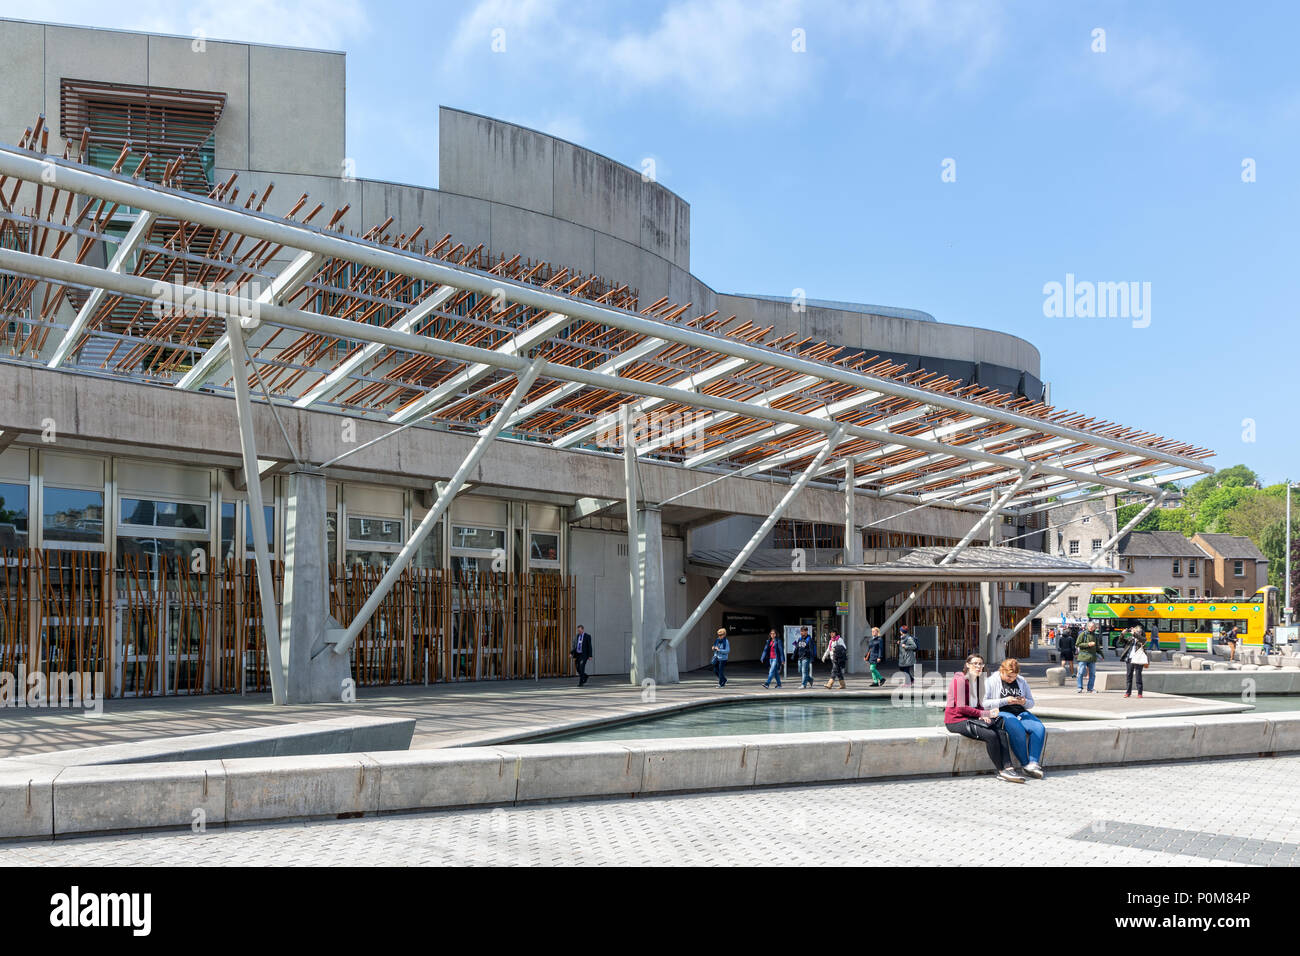 Square with pond in front of Scottish Parliament building Edinburgh. Stock Photo